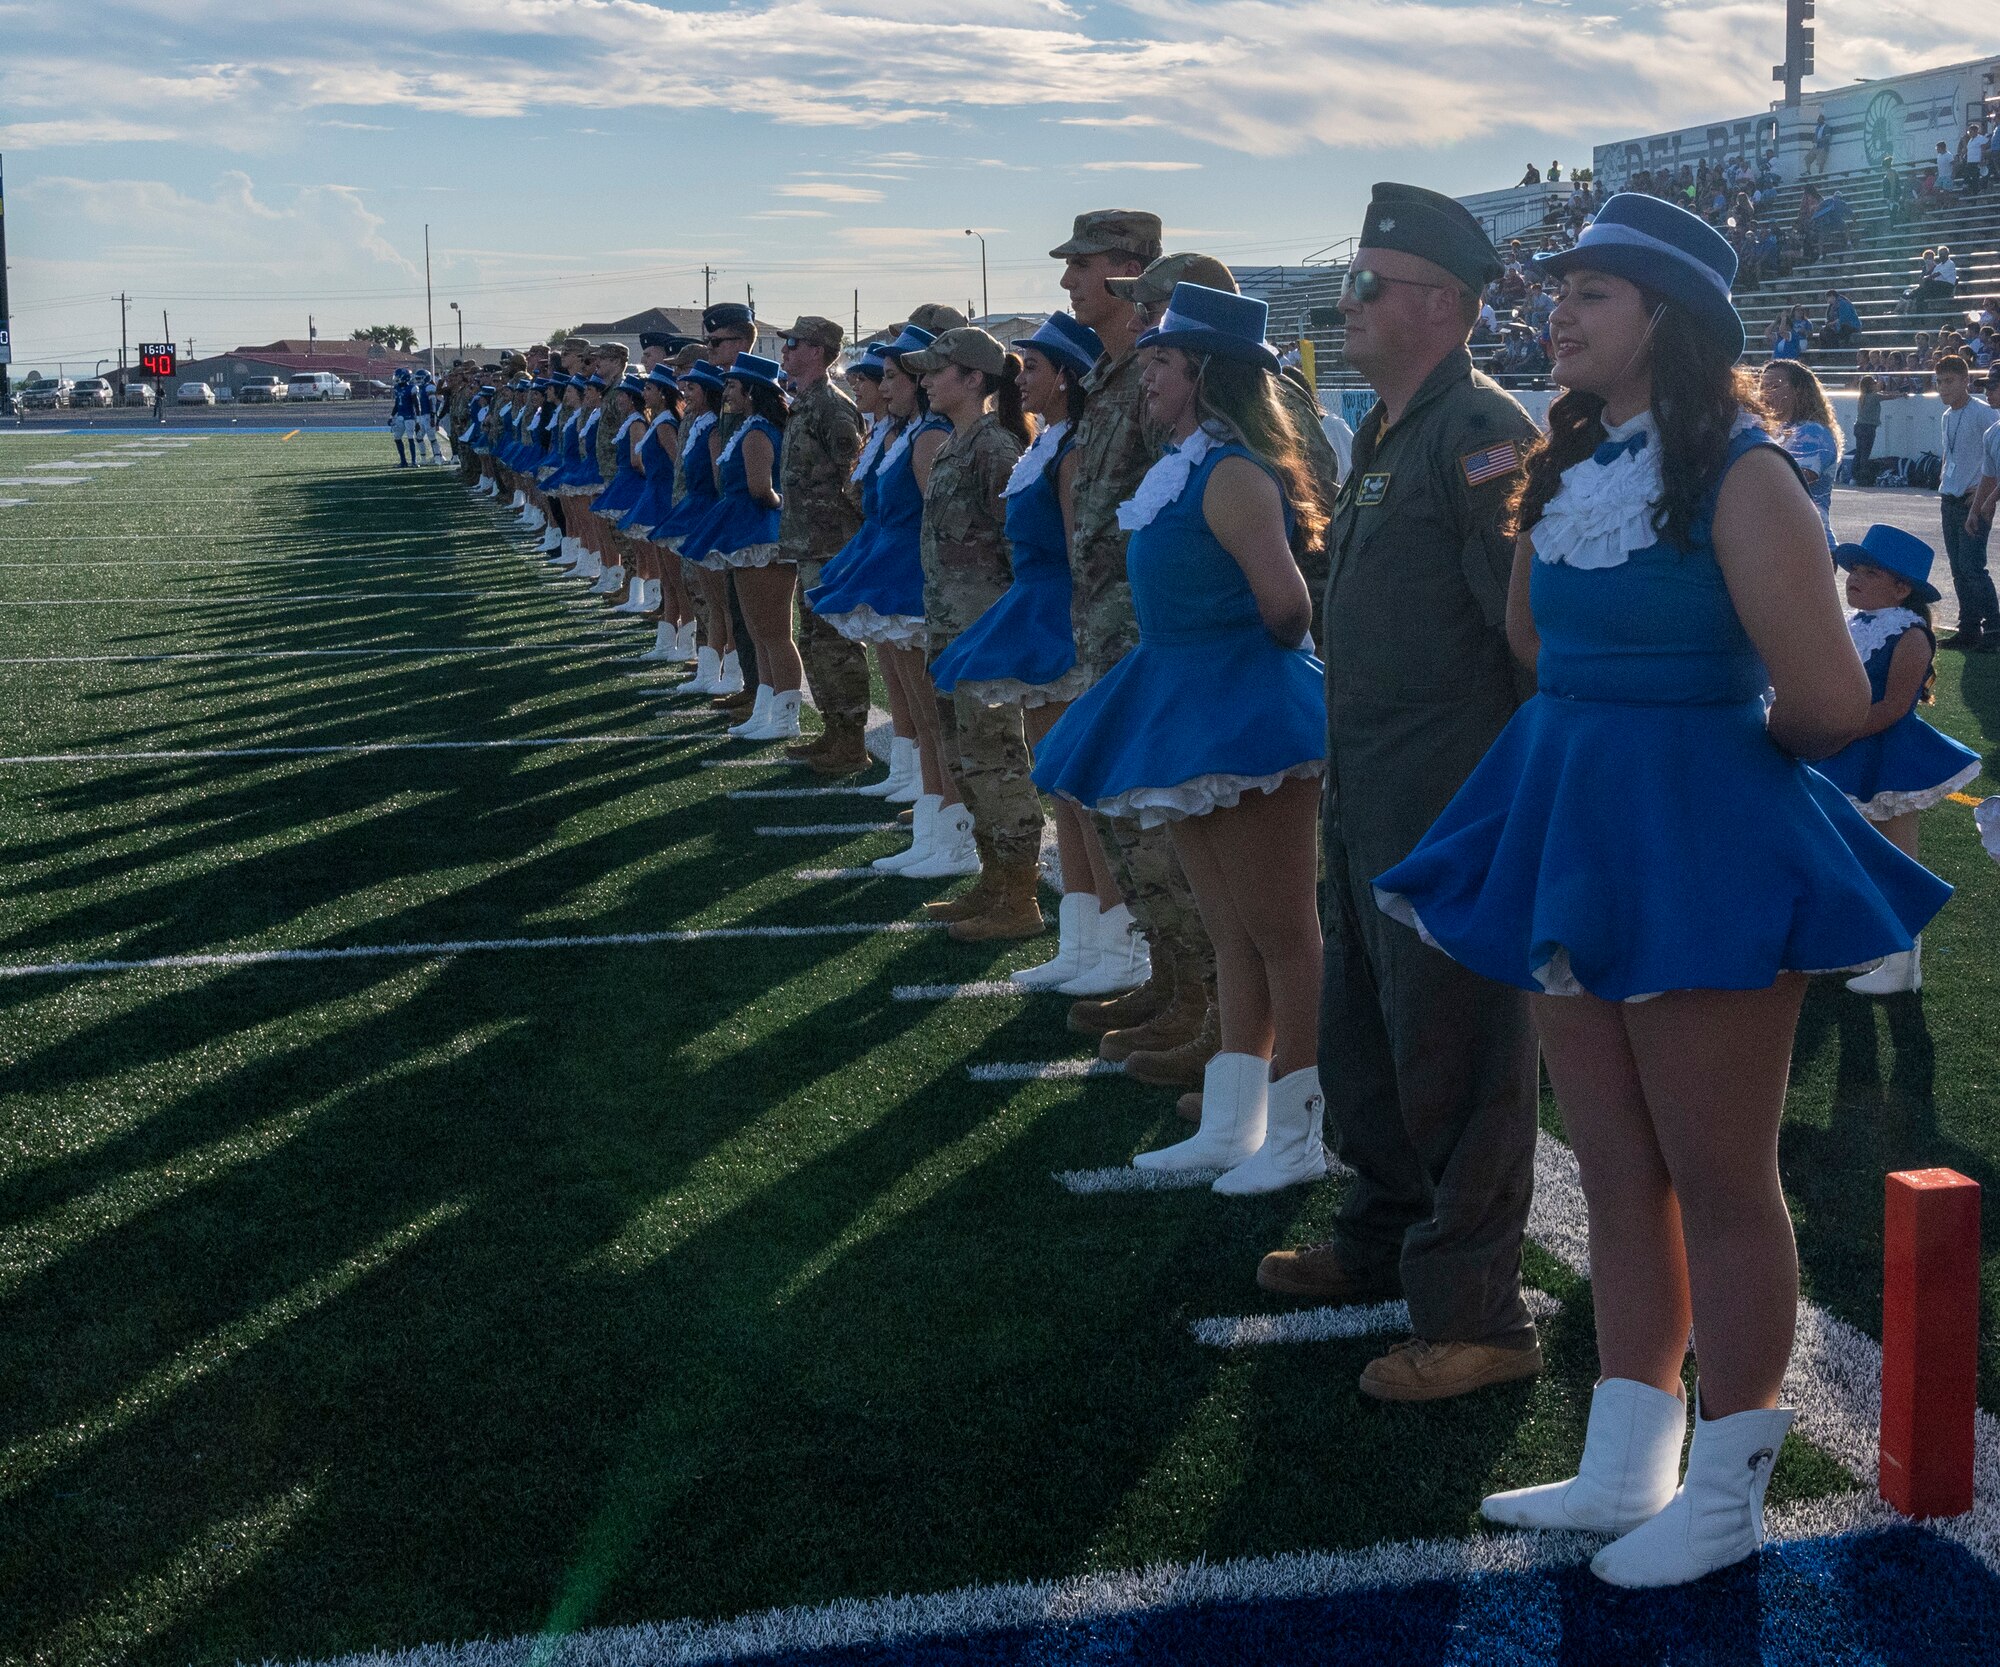 Members from Laughlin Air force Base attend military appreciation night for the homecoming game at Del Rio high school, on Sept. 9, 2022. For Military appreciation night, members from the base led the team out to start the night before Del Rio played their game. (U.S. Air Force photo by Senior Airman Nicholas Larsen)